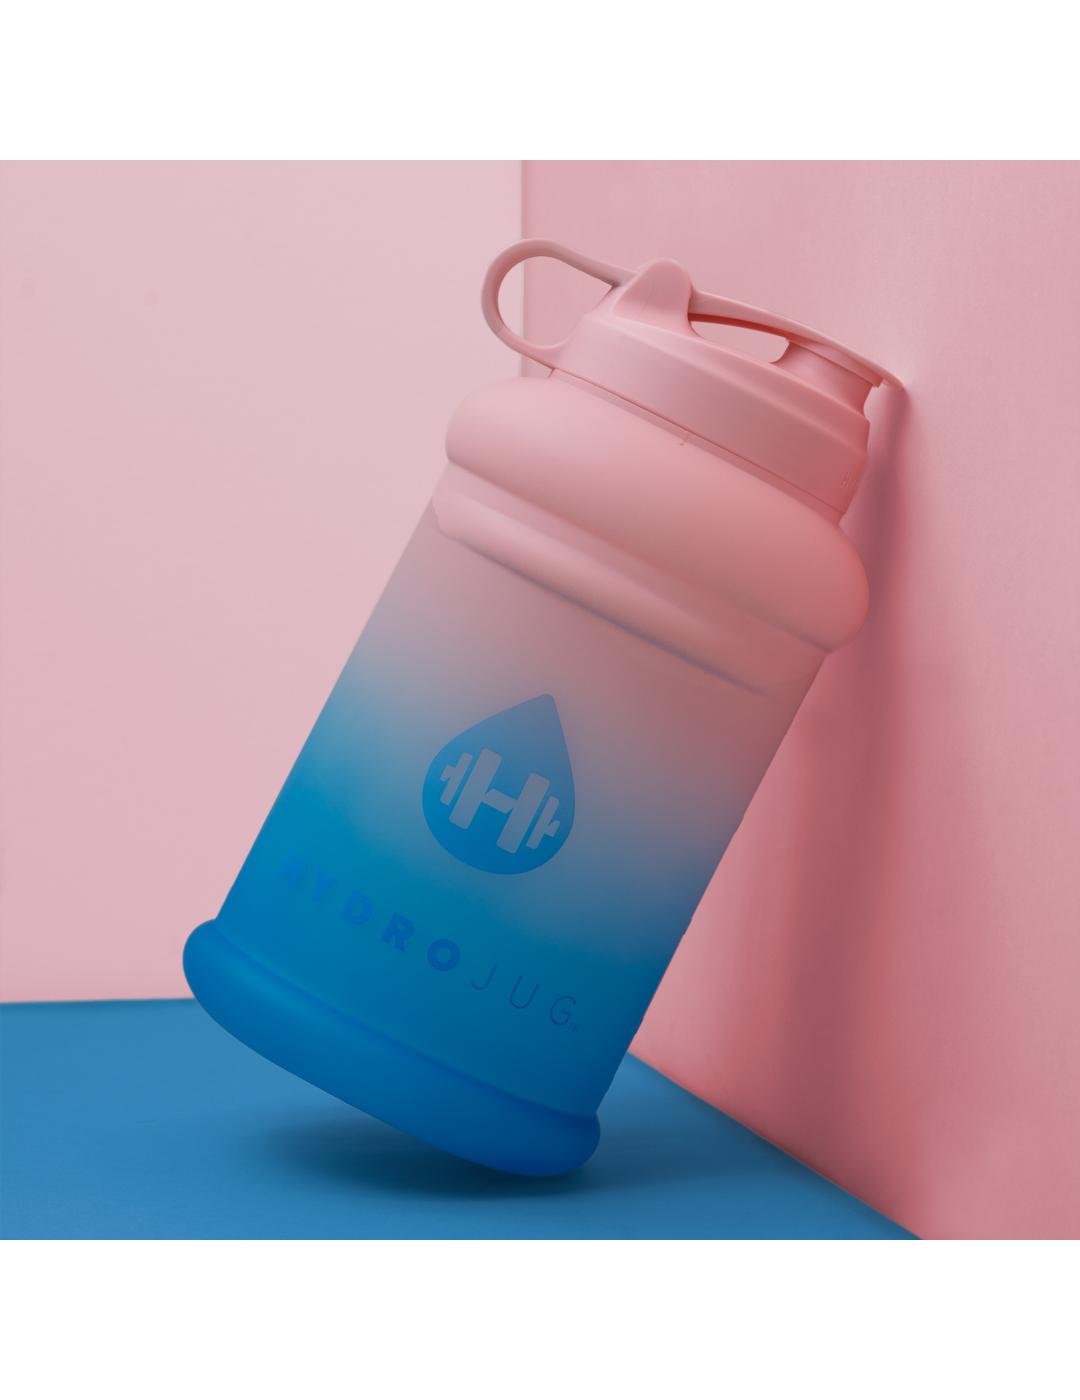 HydroJug Pro Water Bottle - Cotton Candy; image 2 of 2